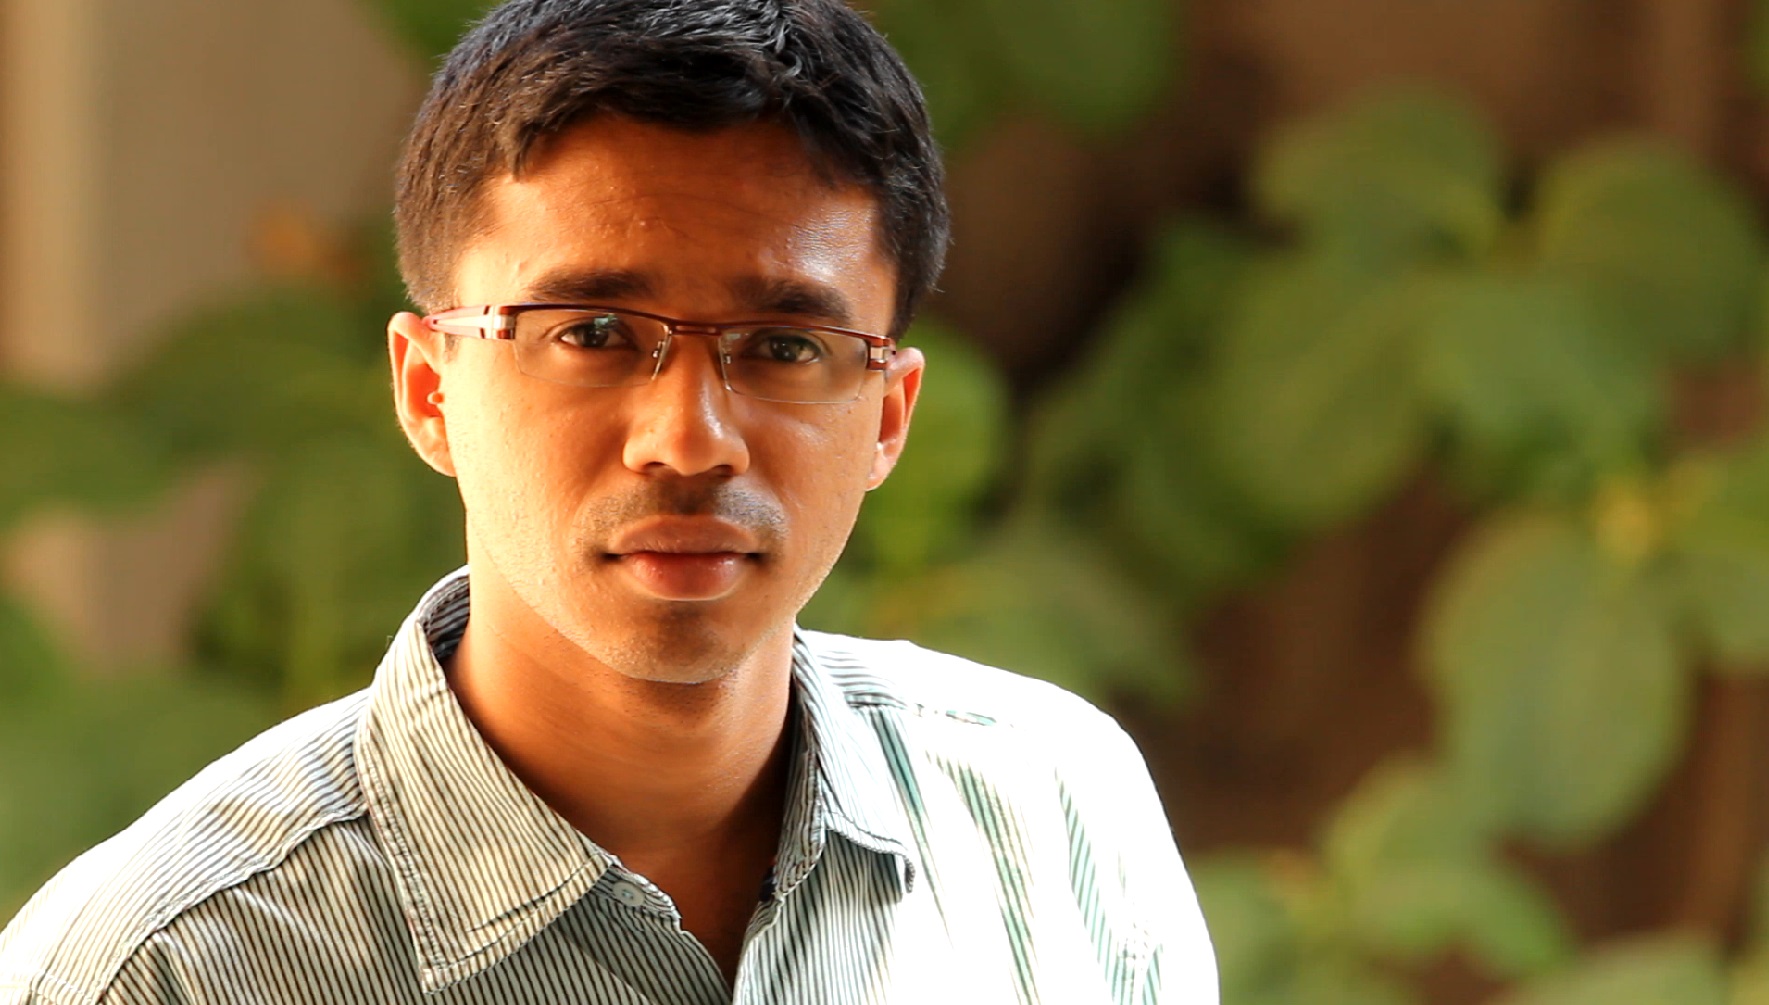 This Engineer Left His Comfortable Life And High Paying Job To Help Villagers Come Out Of Poverty